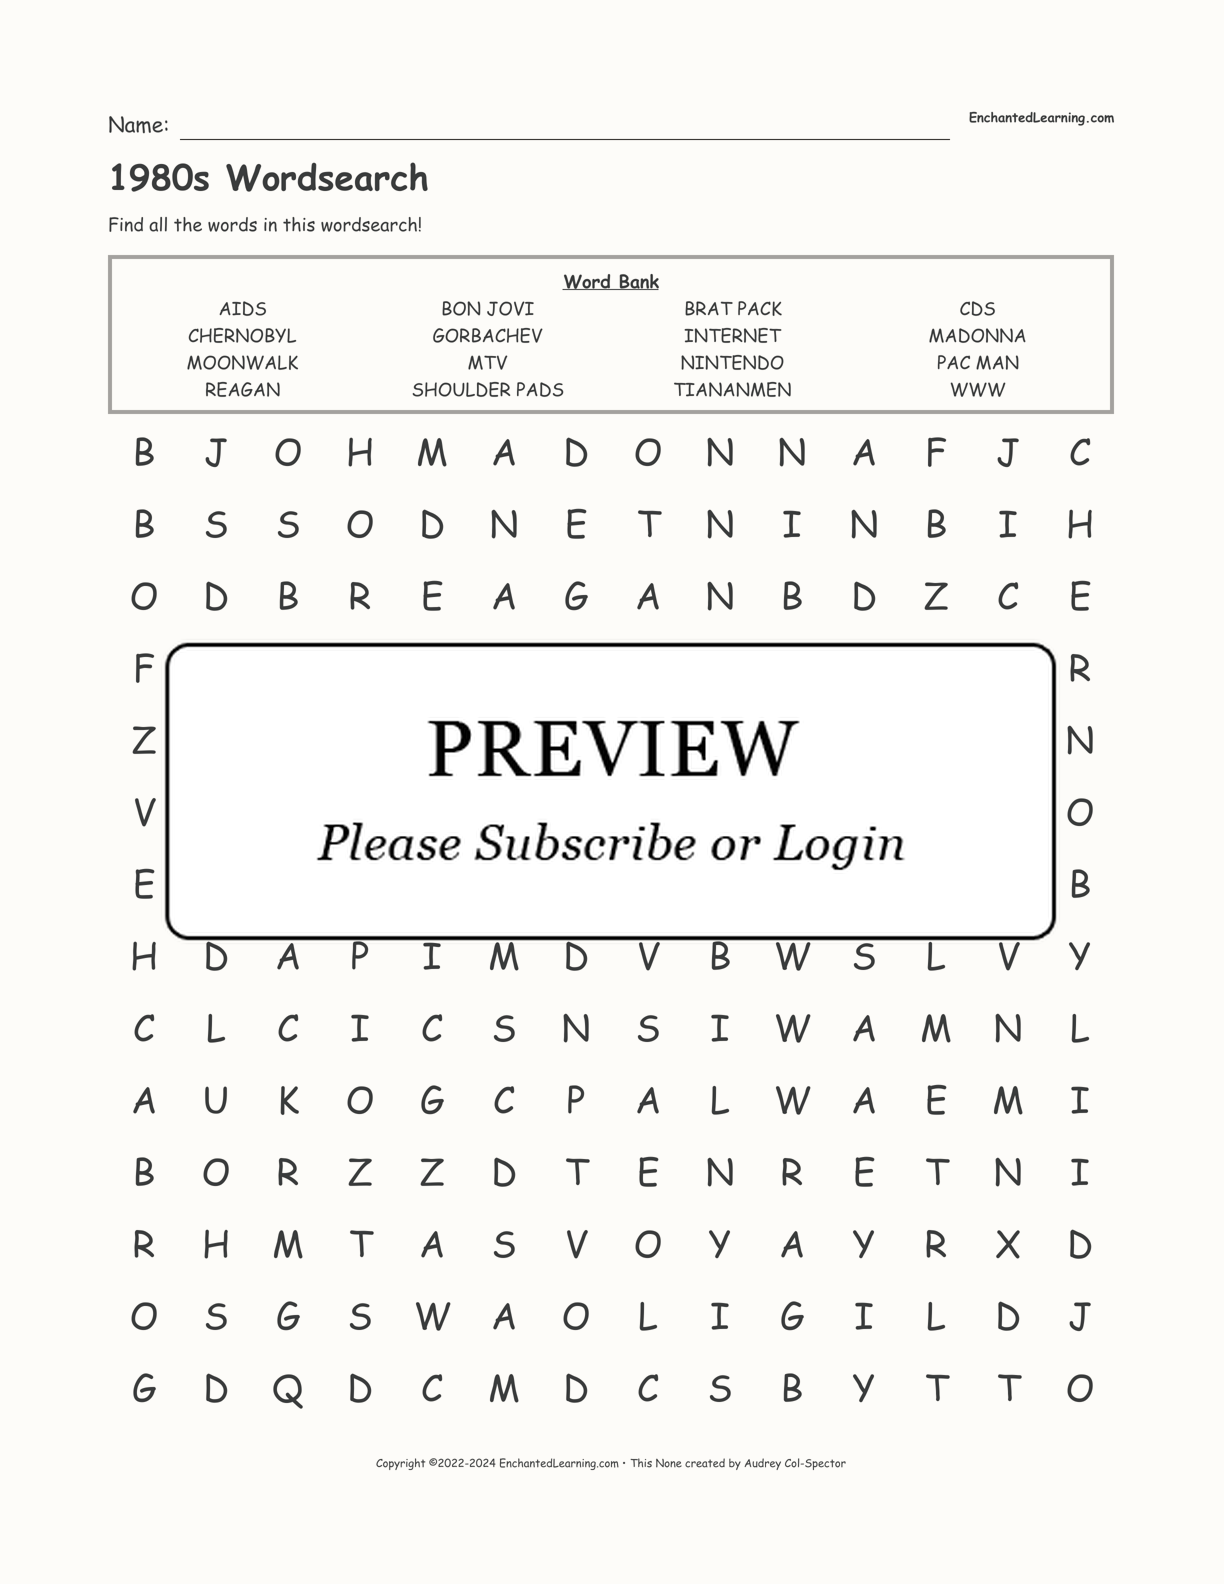 1980s Wordsearch interactive worksheet page 1